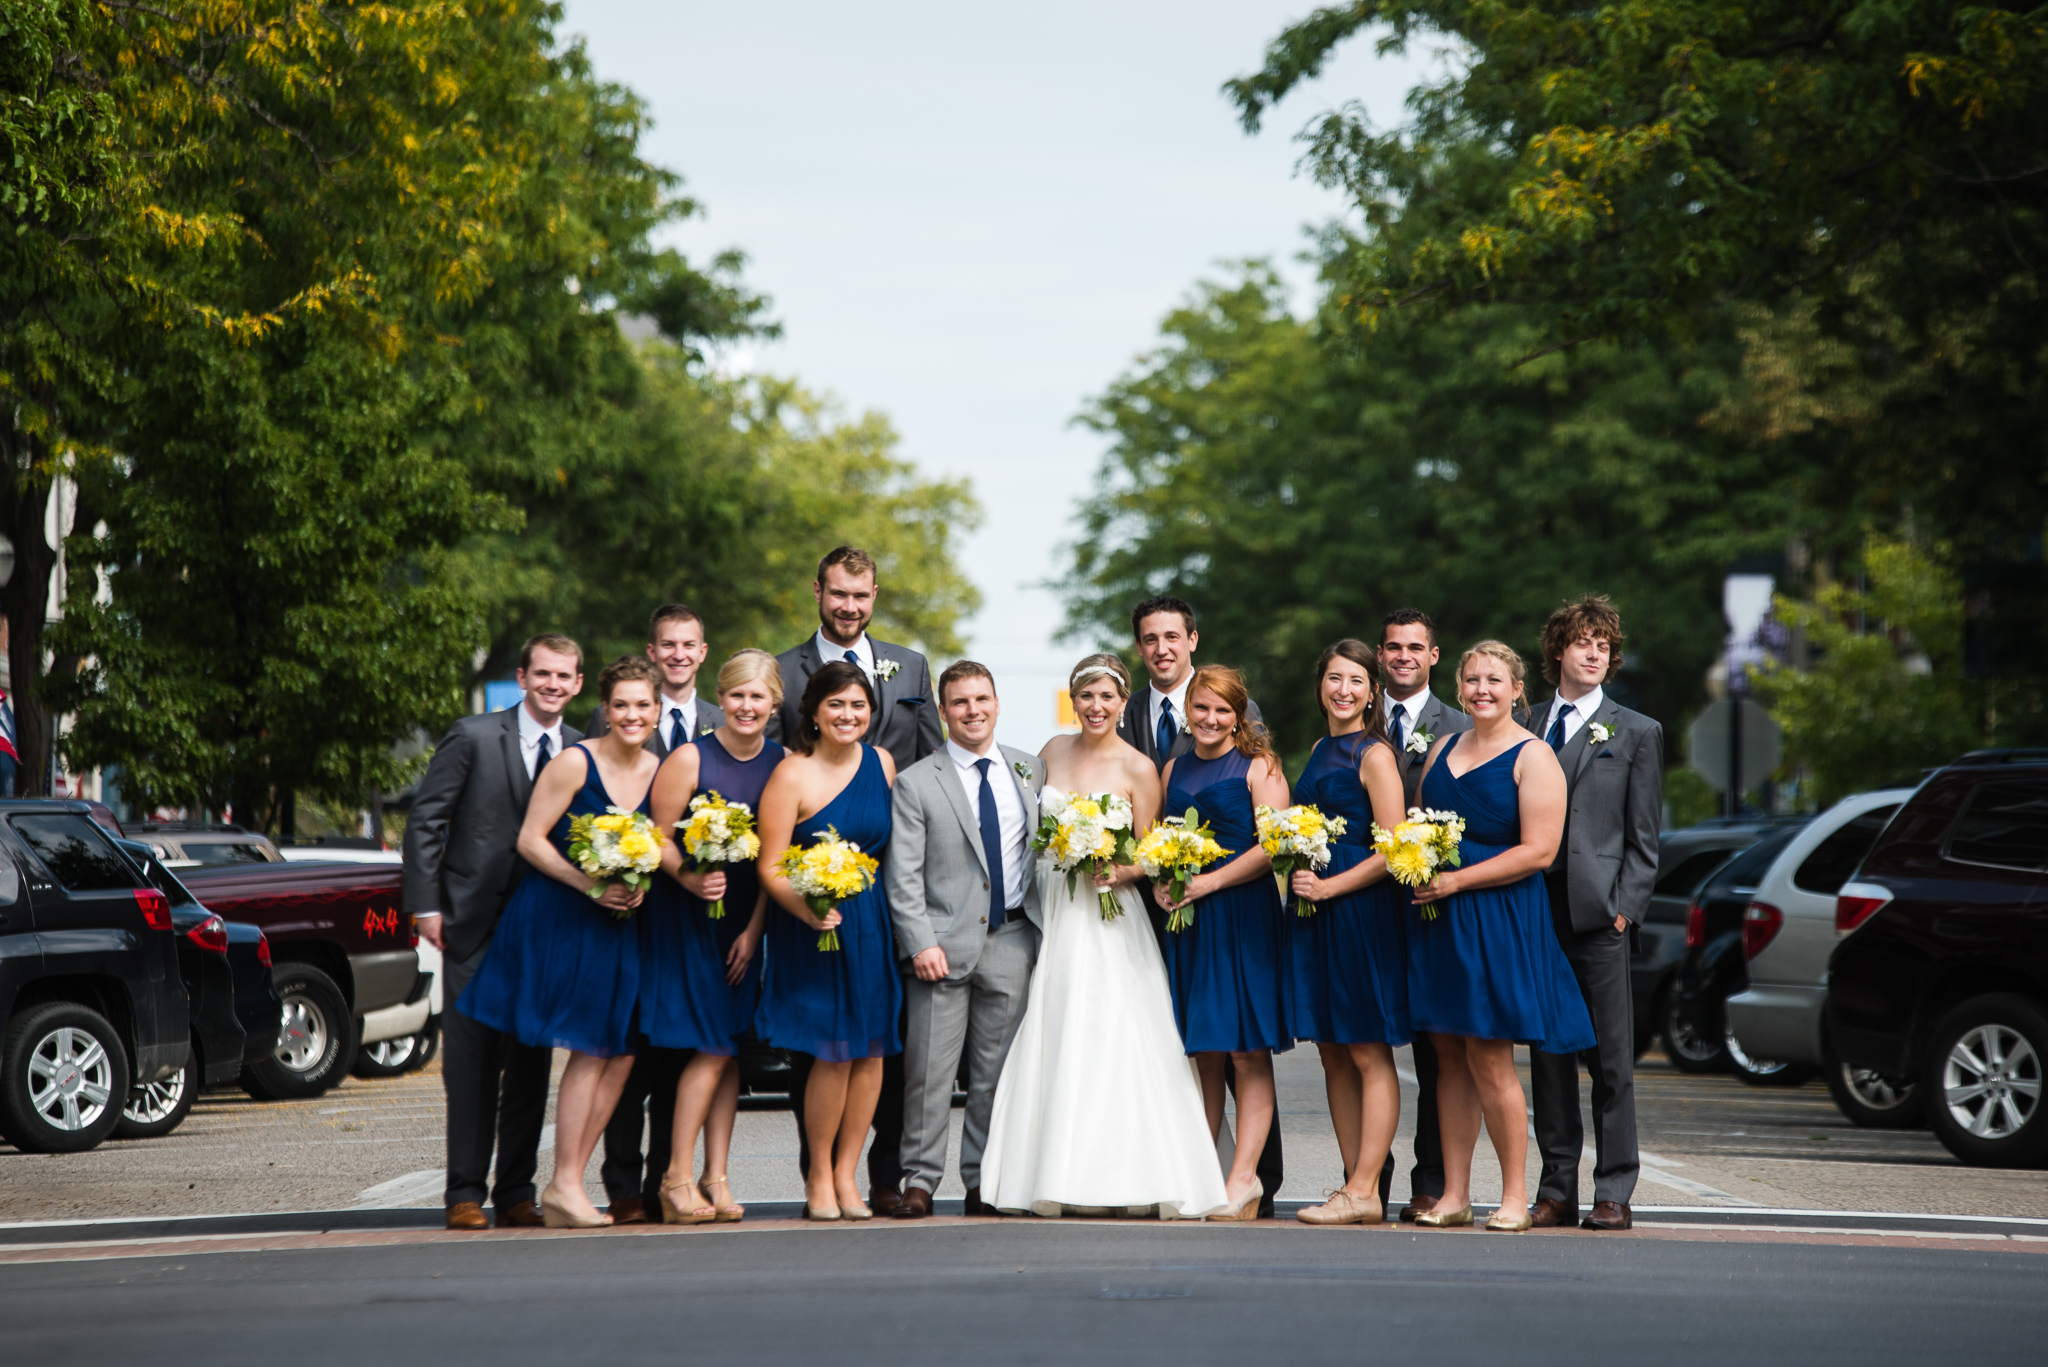 JS Weddings and Events Grand Rapids Wedding Planner and Floral Designer - Navy Blue and Yellow, Classic and Natural Wedding at Baker Events Holland